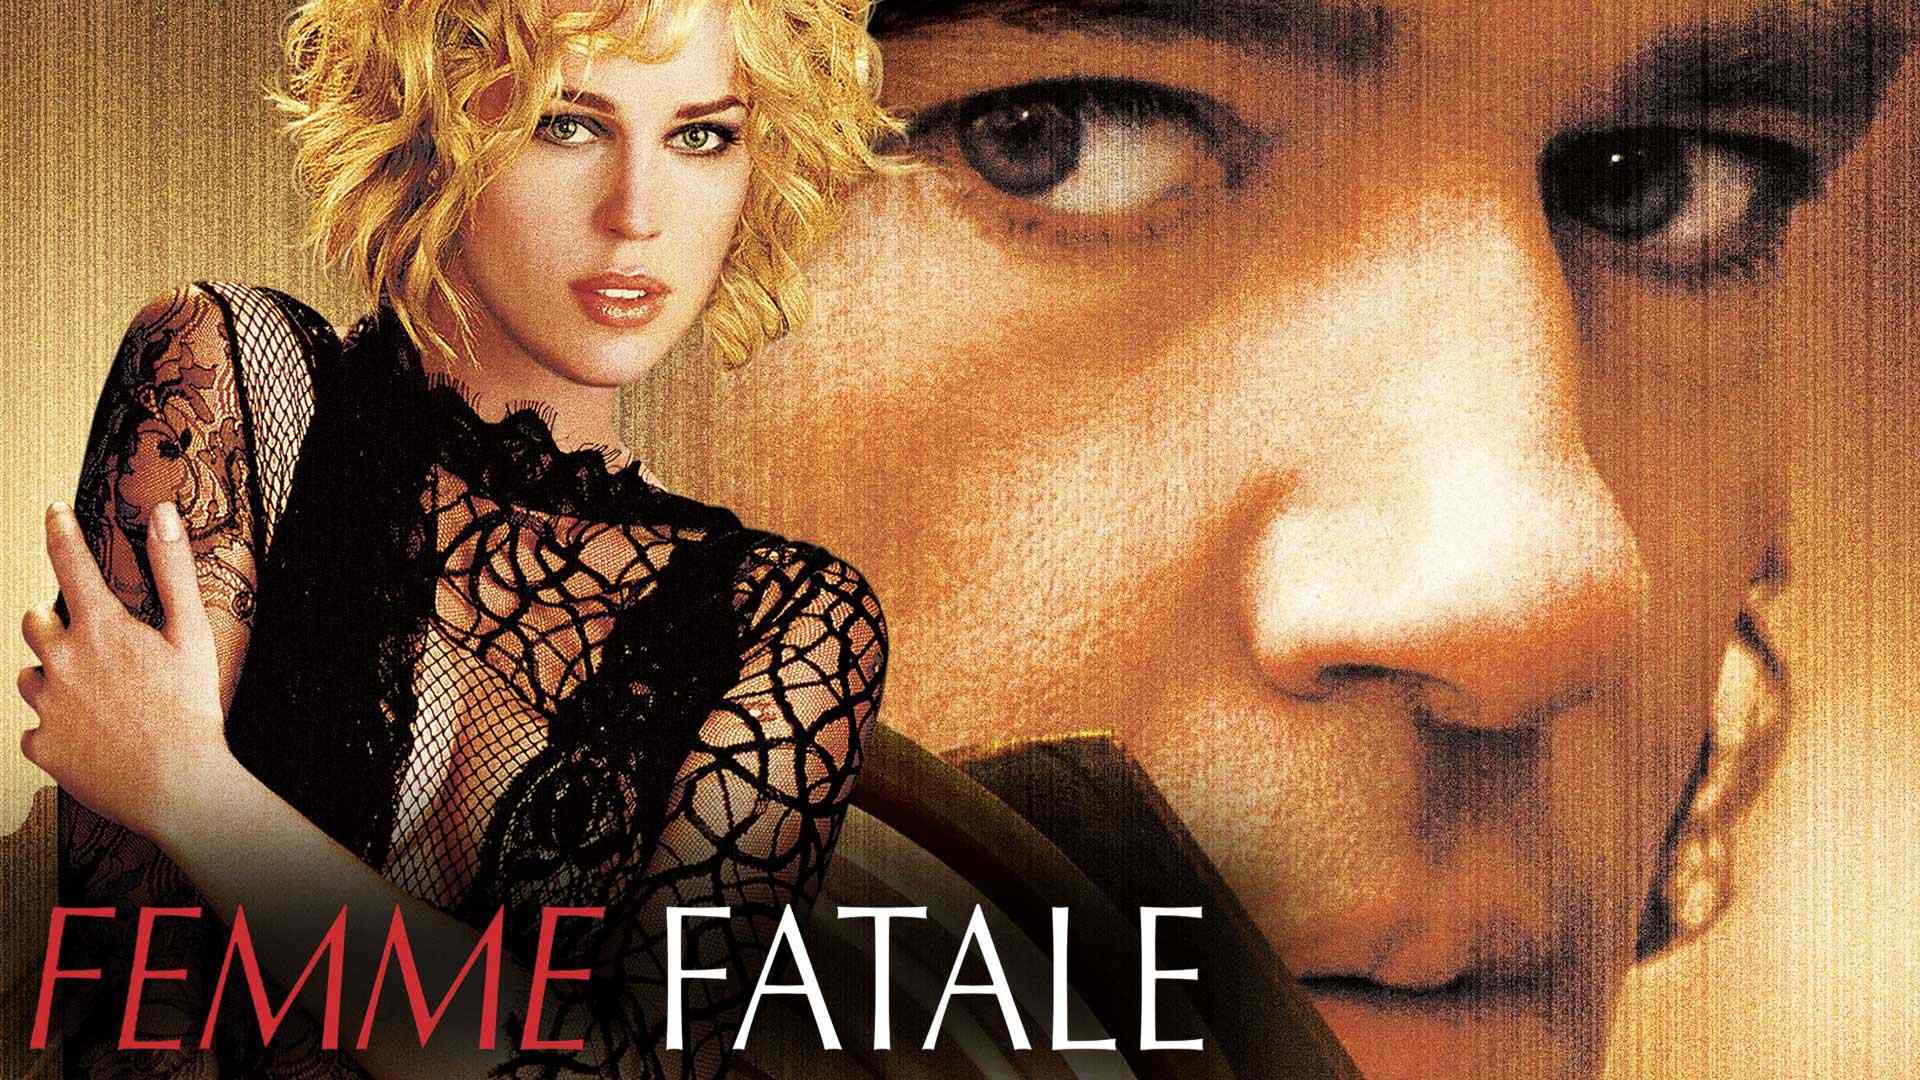 Be A Femme Fatale